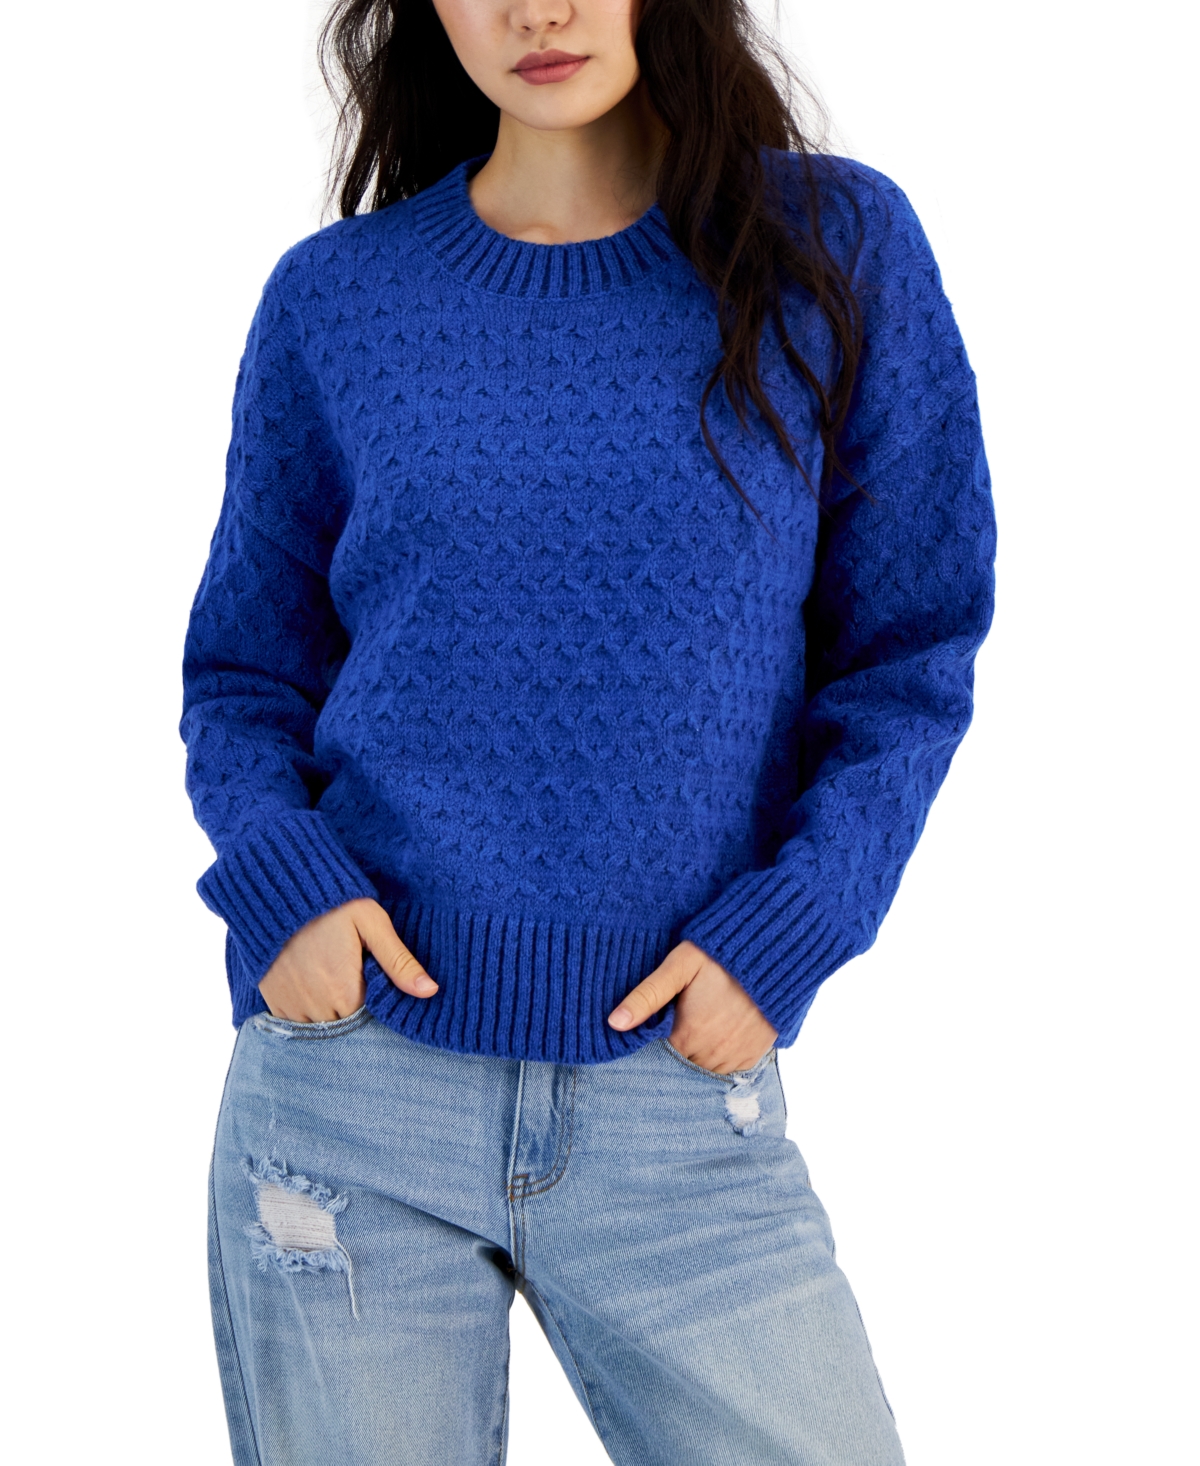 Hooked Up By Iot Juniors' Honeycomb-knit Crewneck Sweater In Bright Cobalt